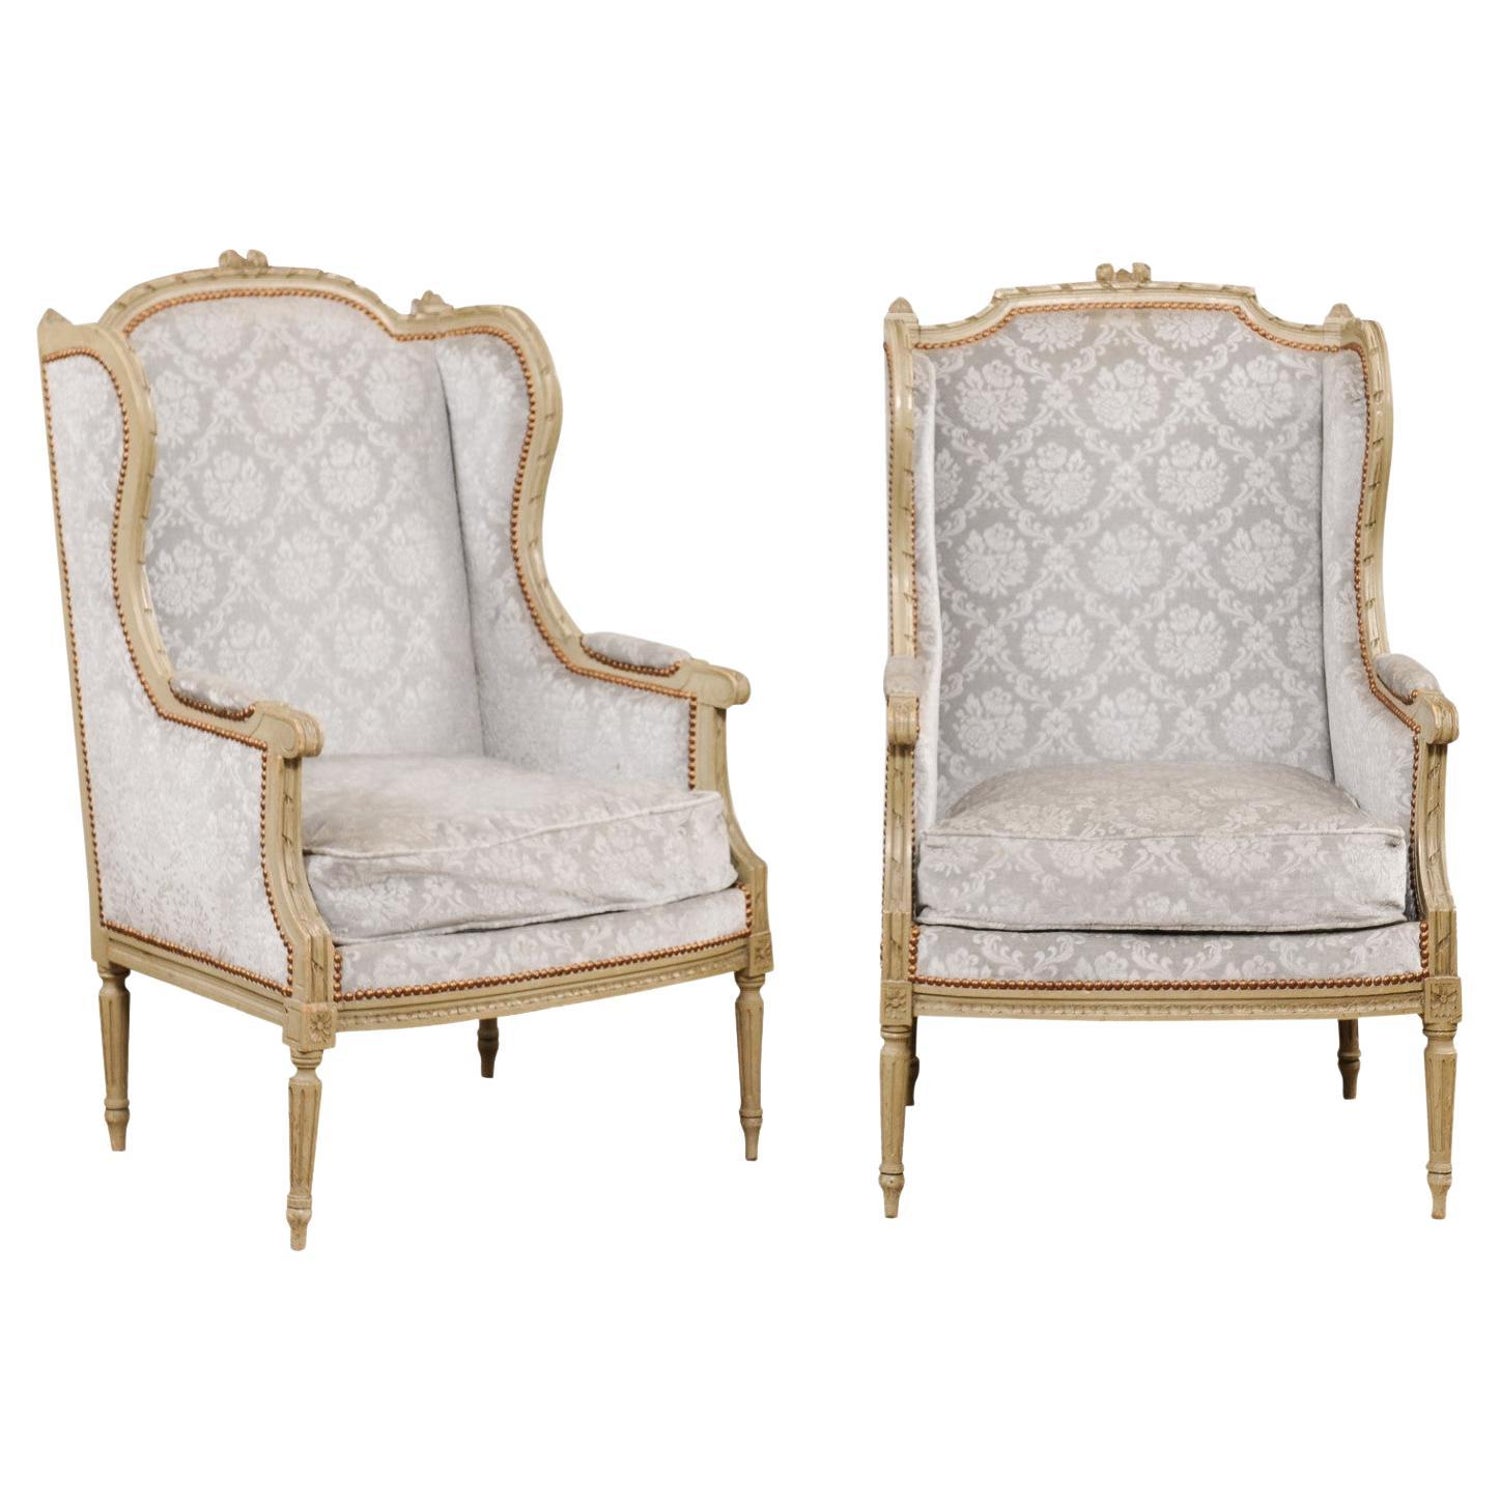 Pair of Mid-19th Century French Louis XV Style Beechwood Bergere Armchairs  - Antiques Resources, Chicago